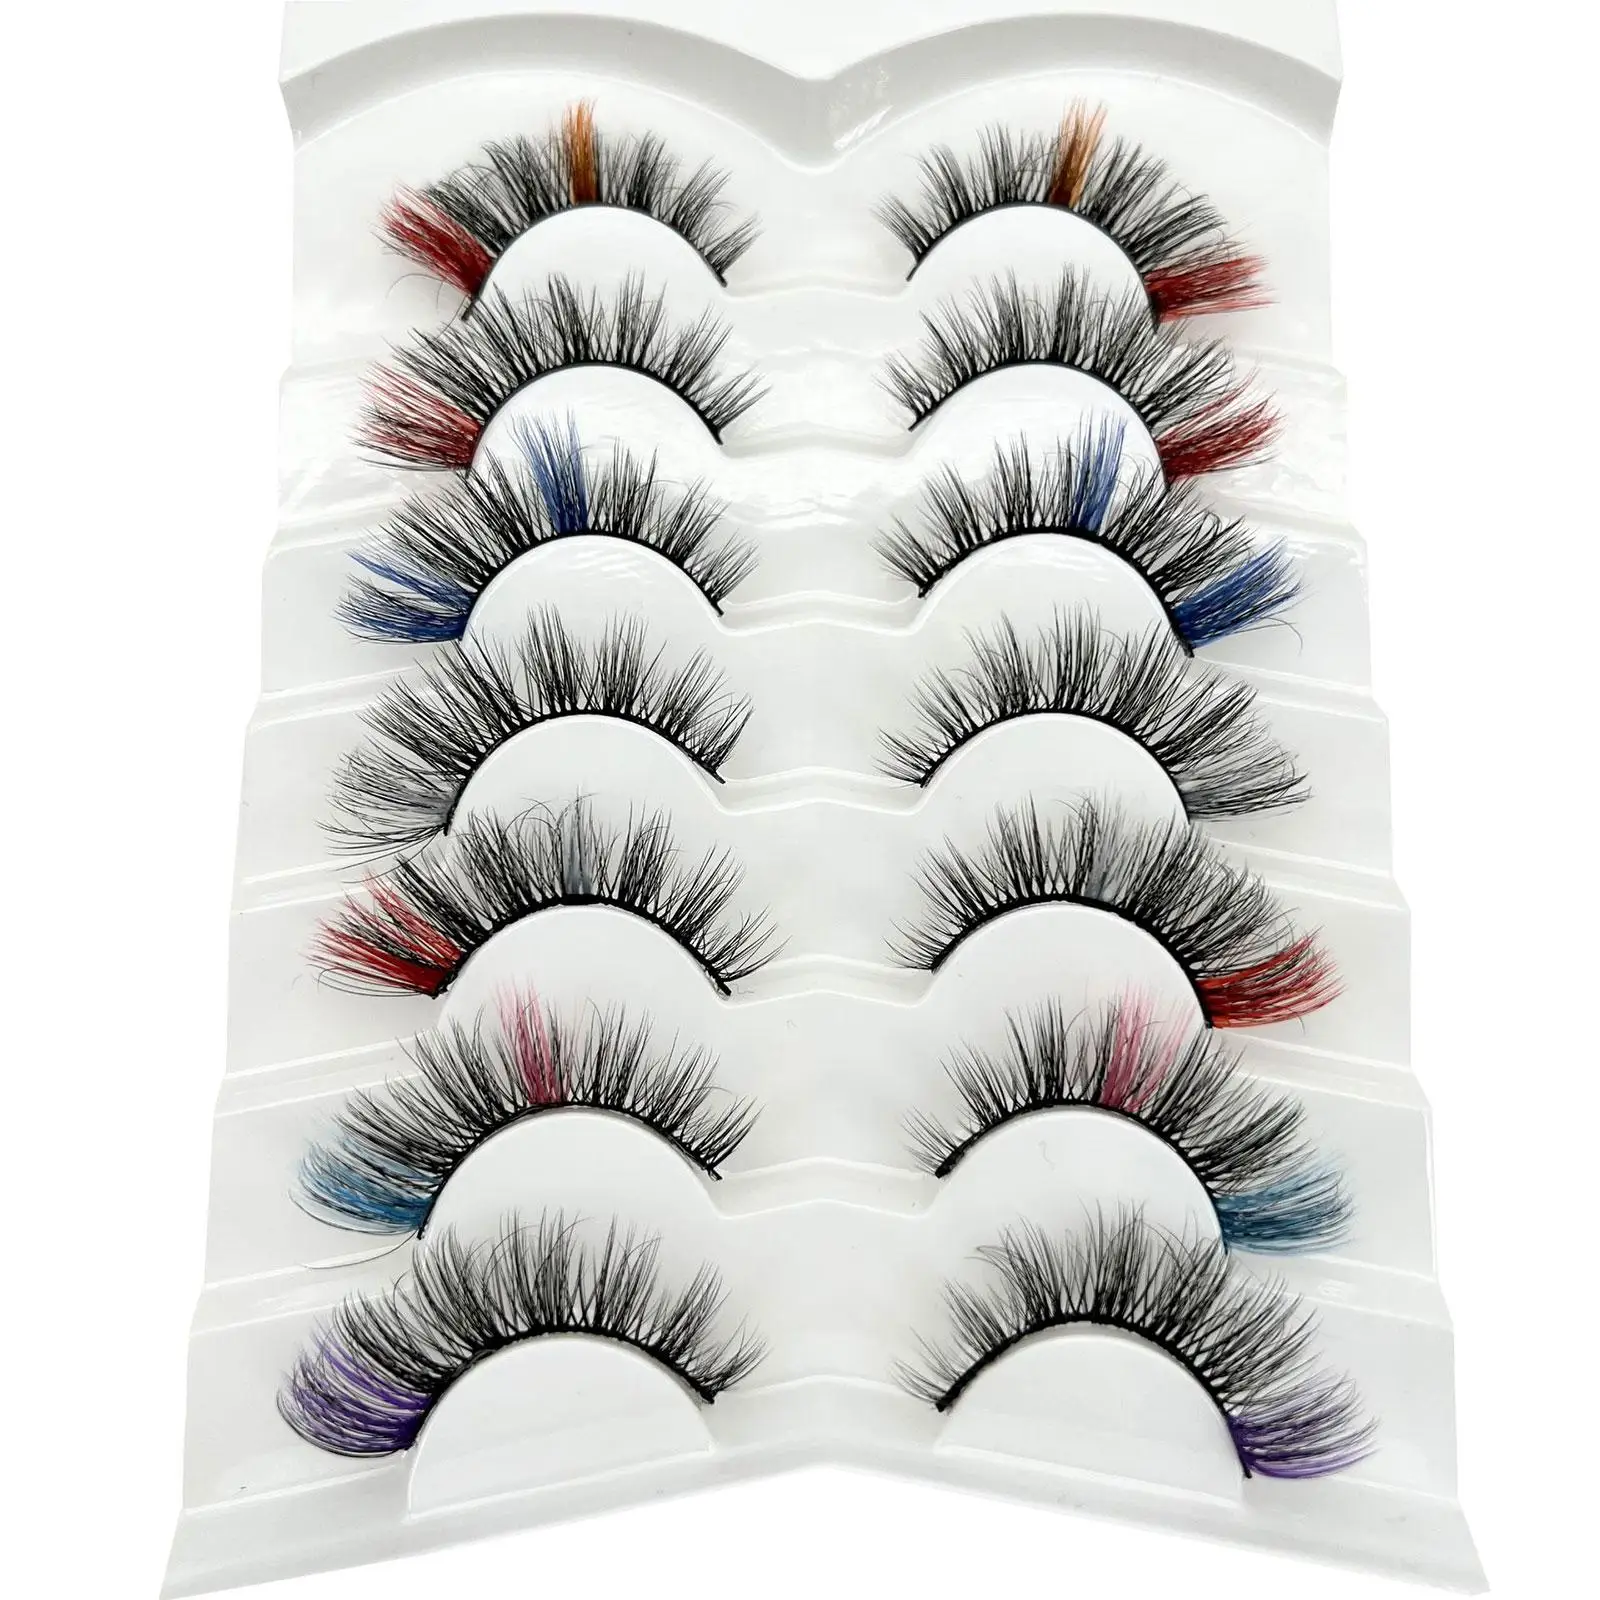 14Pieces Colored Lashes Natural Look Fake Eyelashes Soft Natural Long False Lashes with Color for Thanksgiving Cosplay